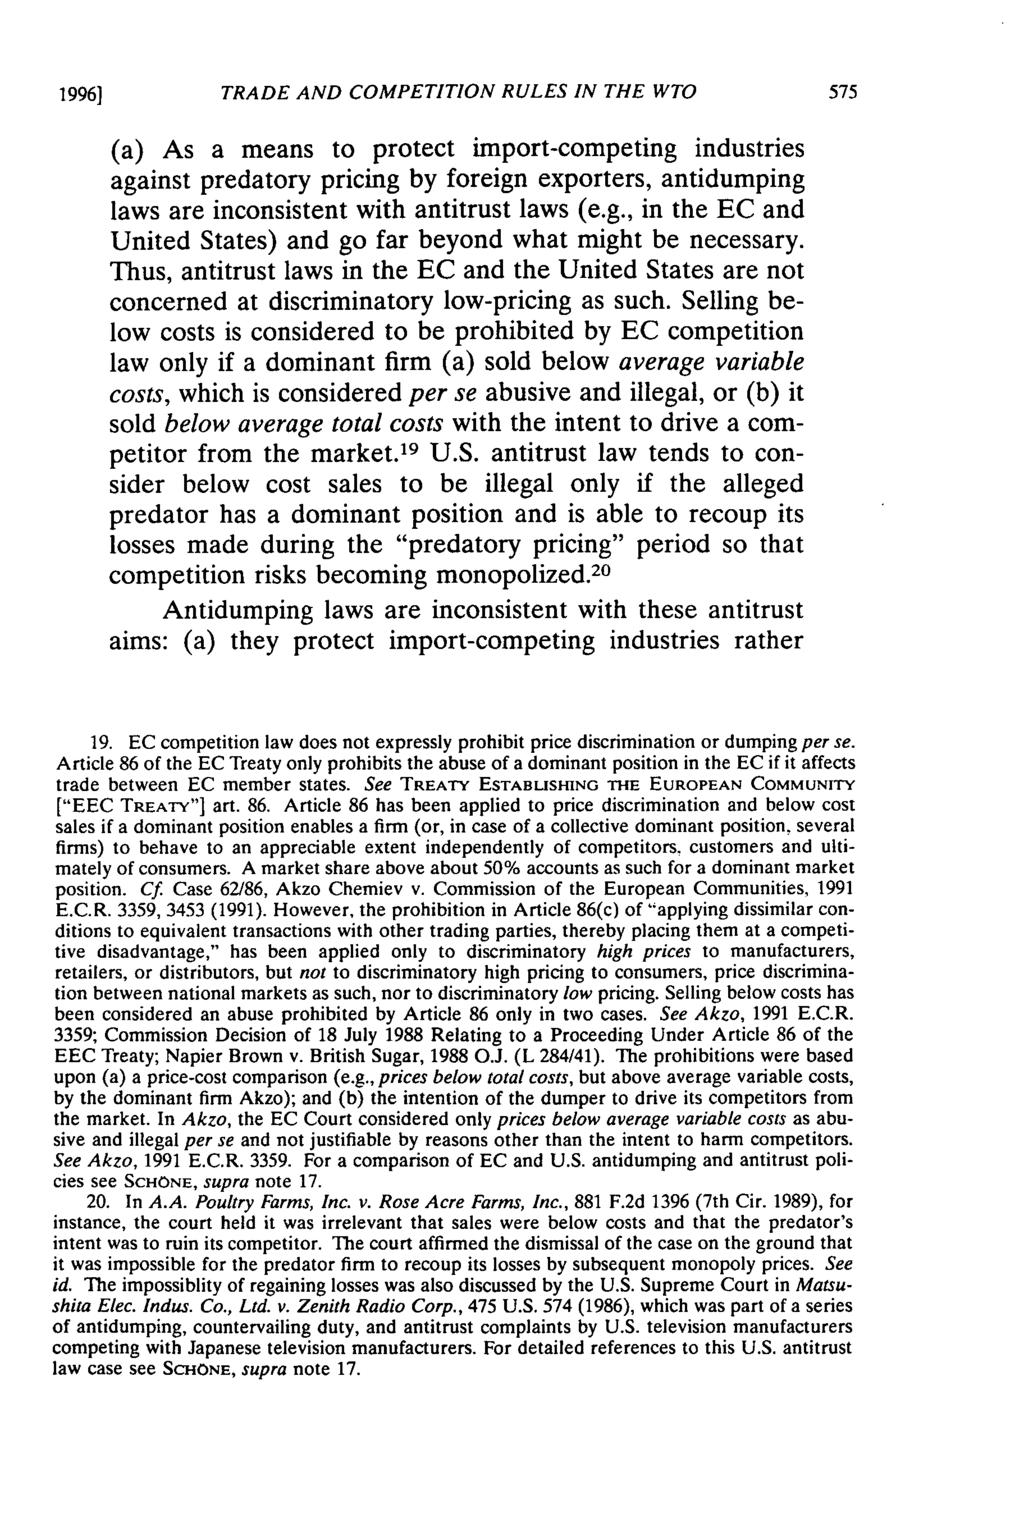 19961 TRADE AND COMPETITION RULES IN THE WTO (a) As a means to protect import-competing industries against predatory pricing by foreign exporters, antidumping laws are inconsistent with antitrust